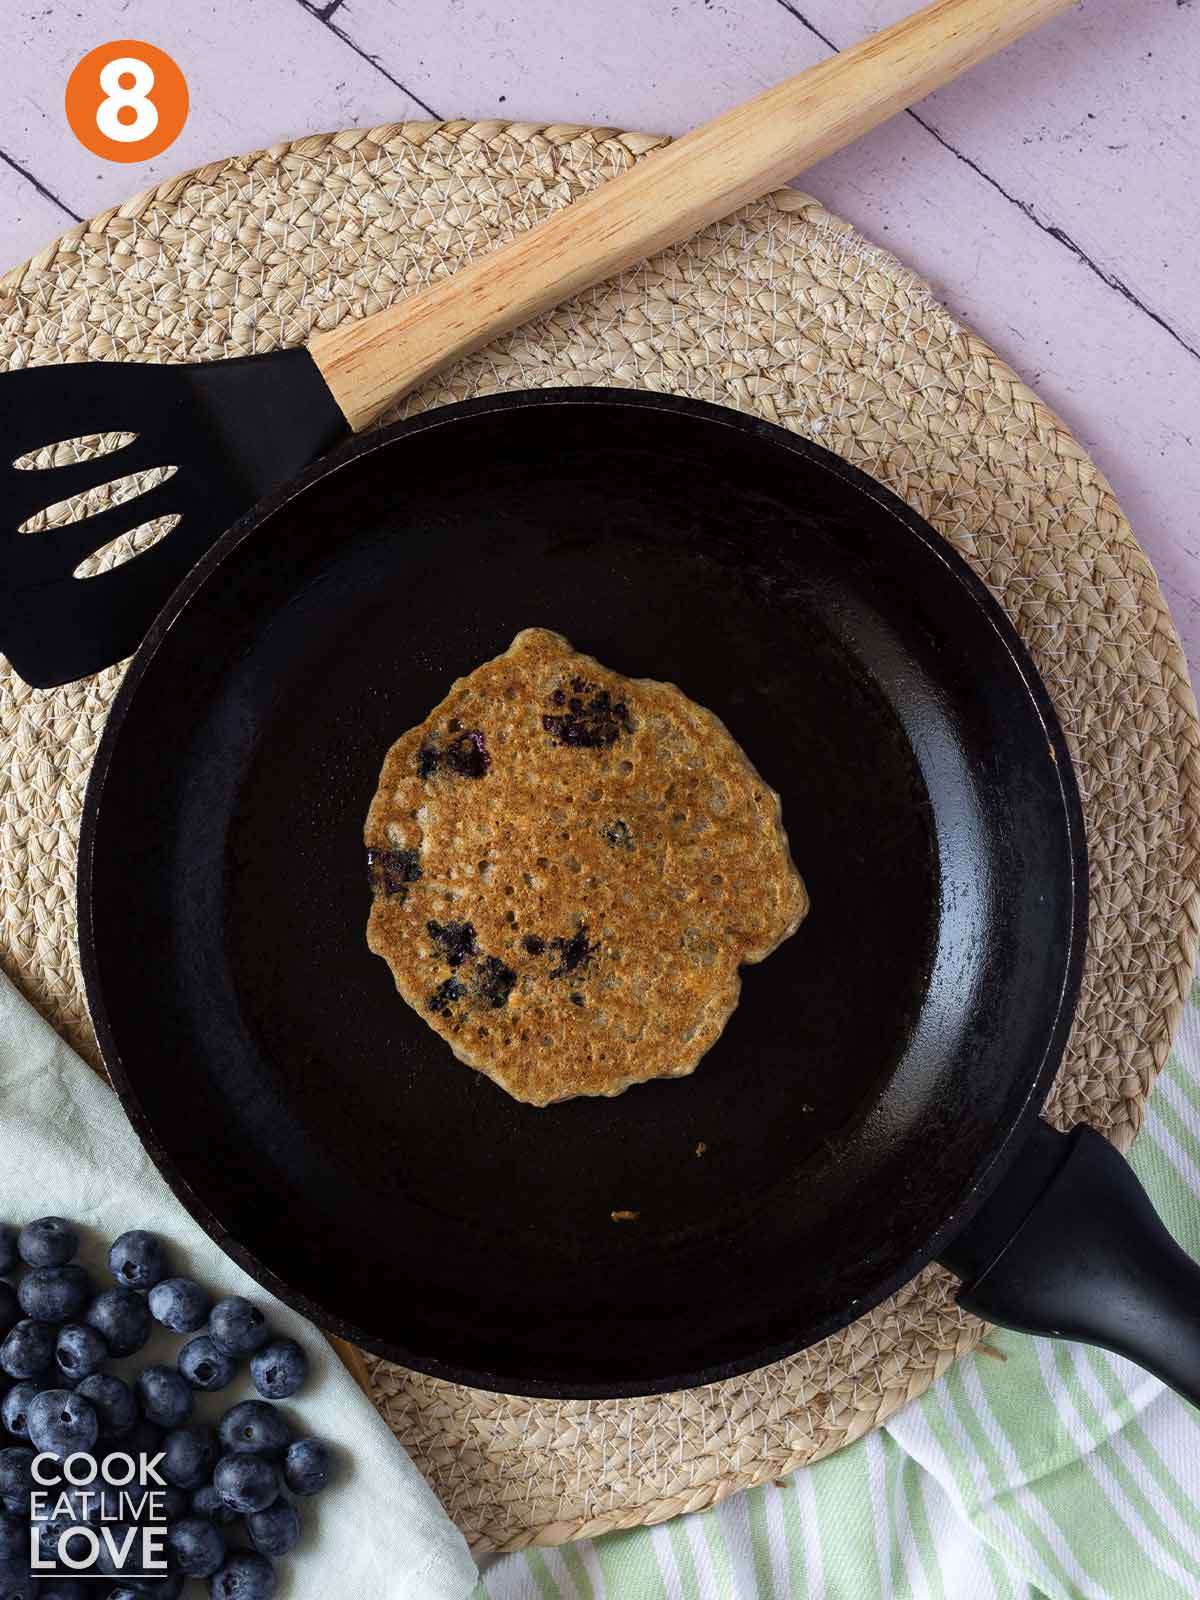 One vegan blueberry pancake flipped over to cook on the other side.